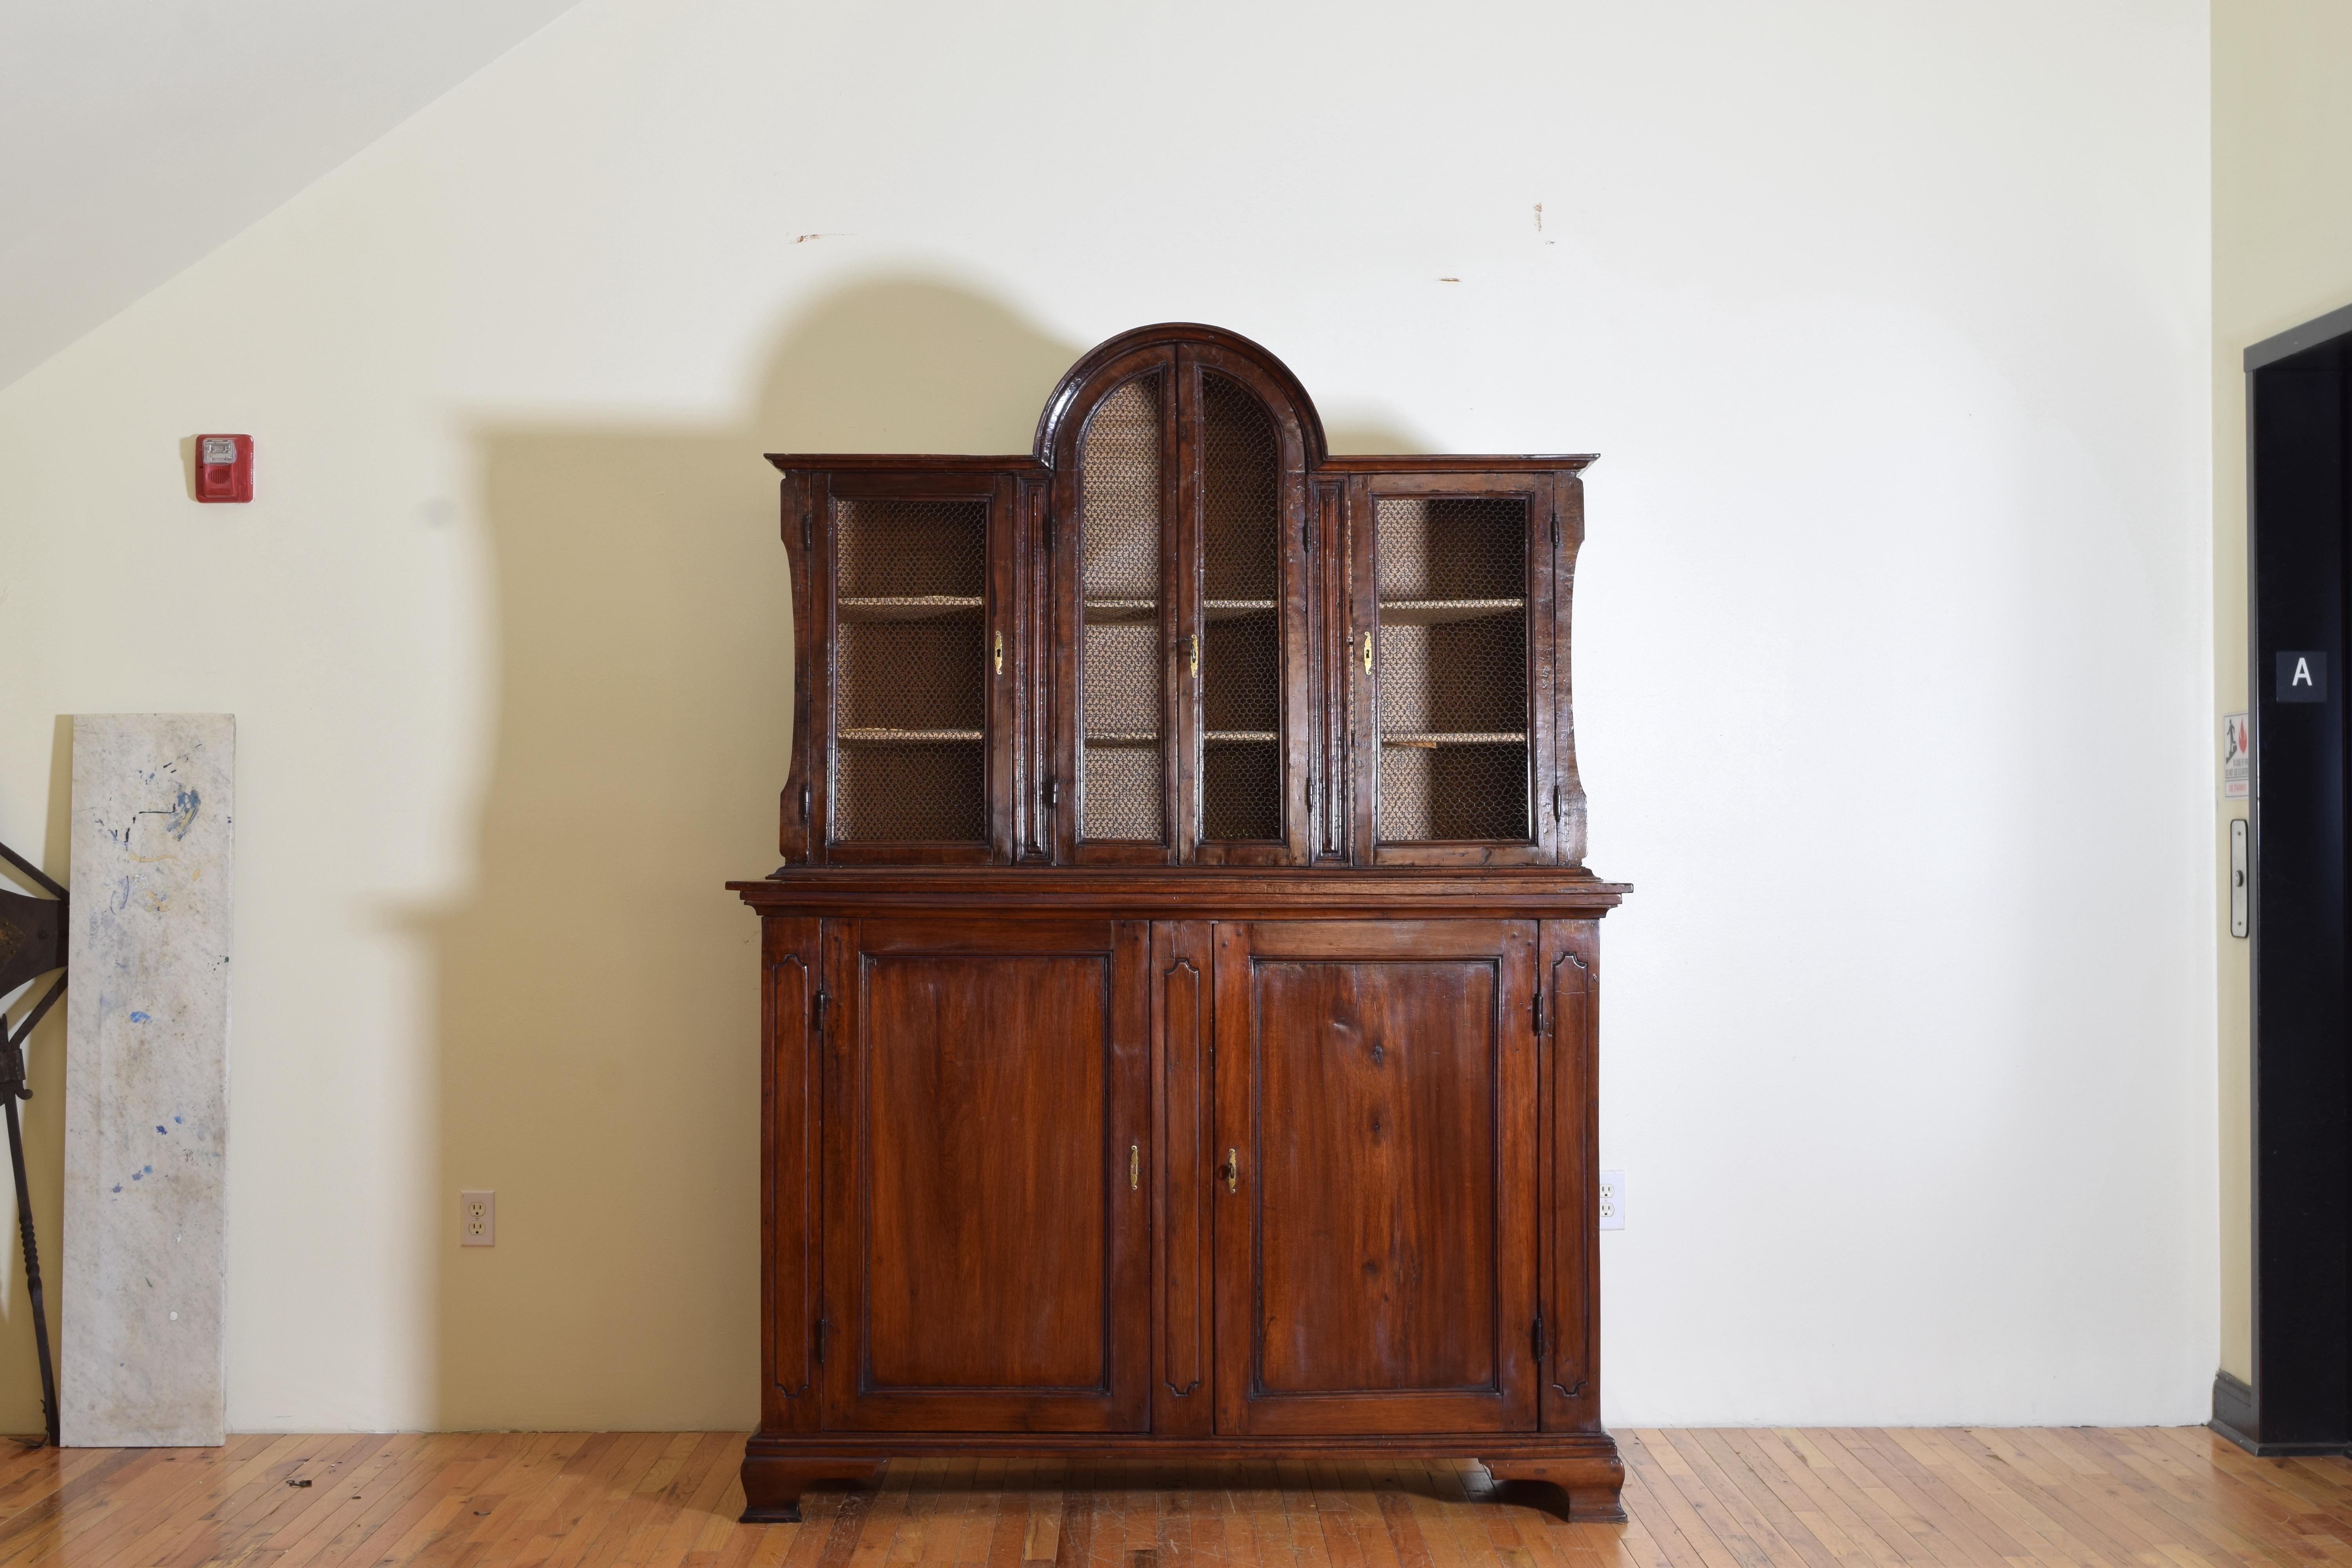 The upper piece with an arched middle section flanked by two equal sections, the locking doors fronted with wire, the lower piece probably of a later date and associated and has two paneled doors opening to reveal interior drawers and is raised on